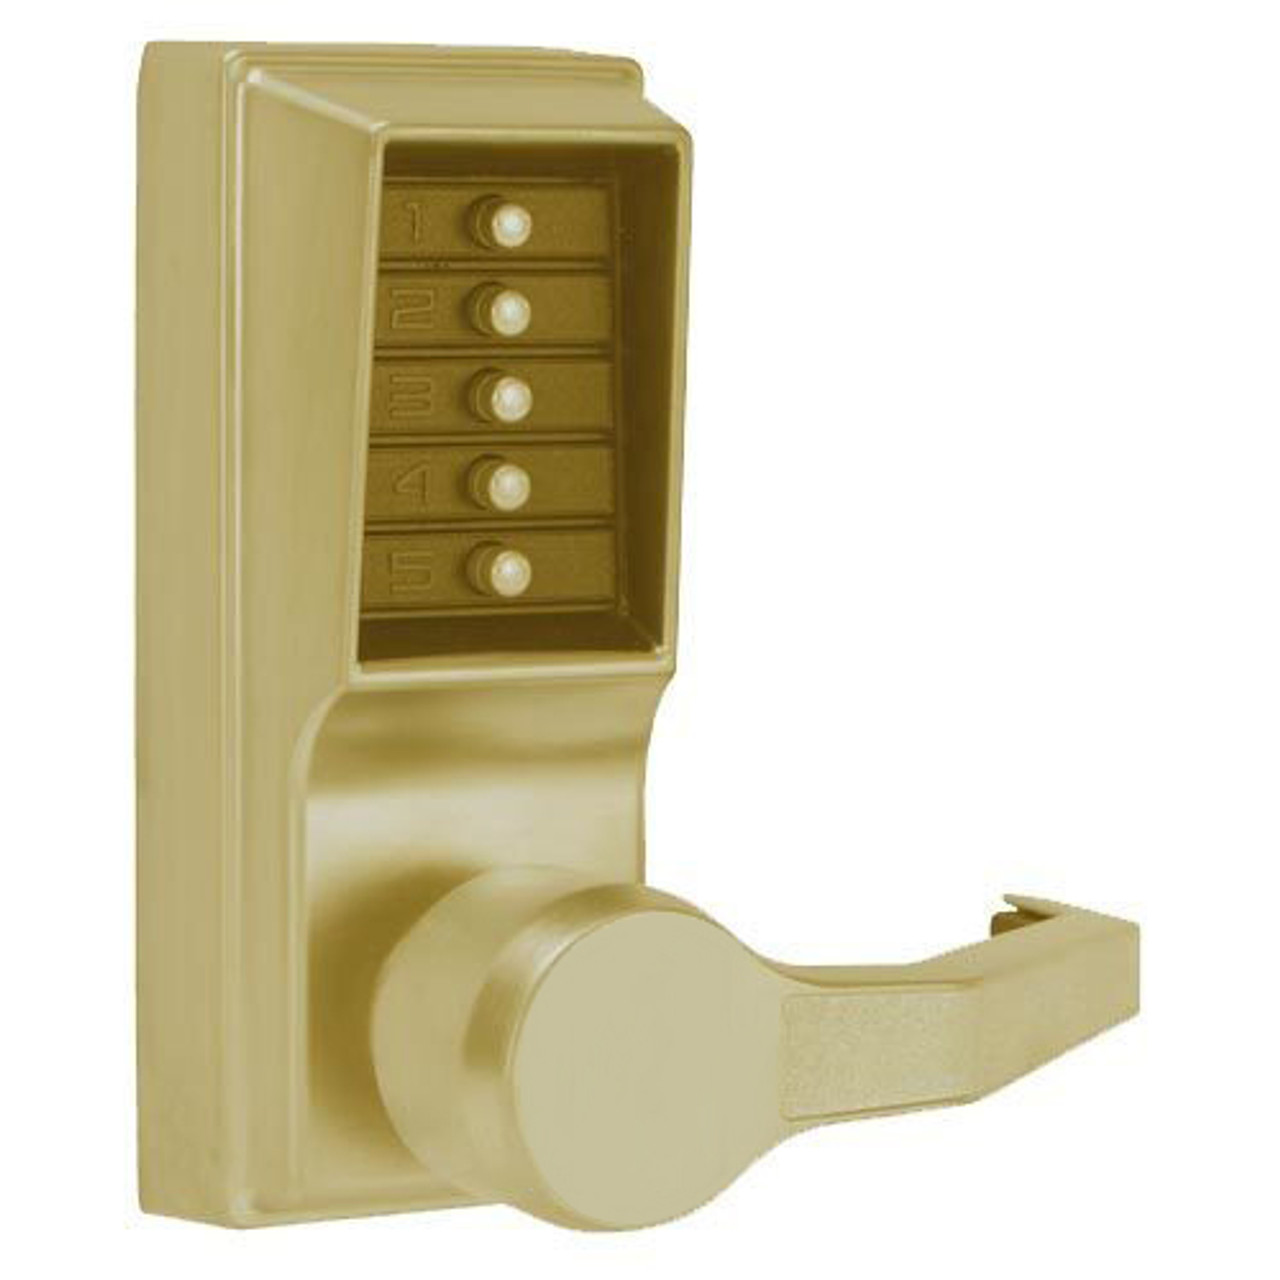 LR1032-05-41 Simplex Pushbutton Lever Lock with No Key Override in Antique Brass